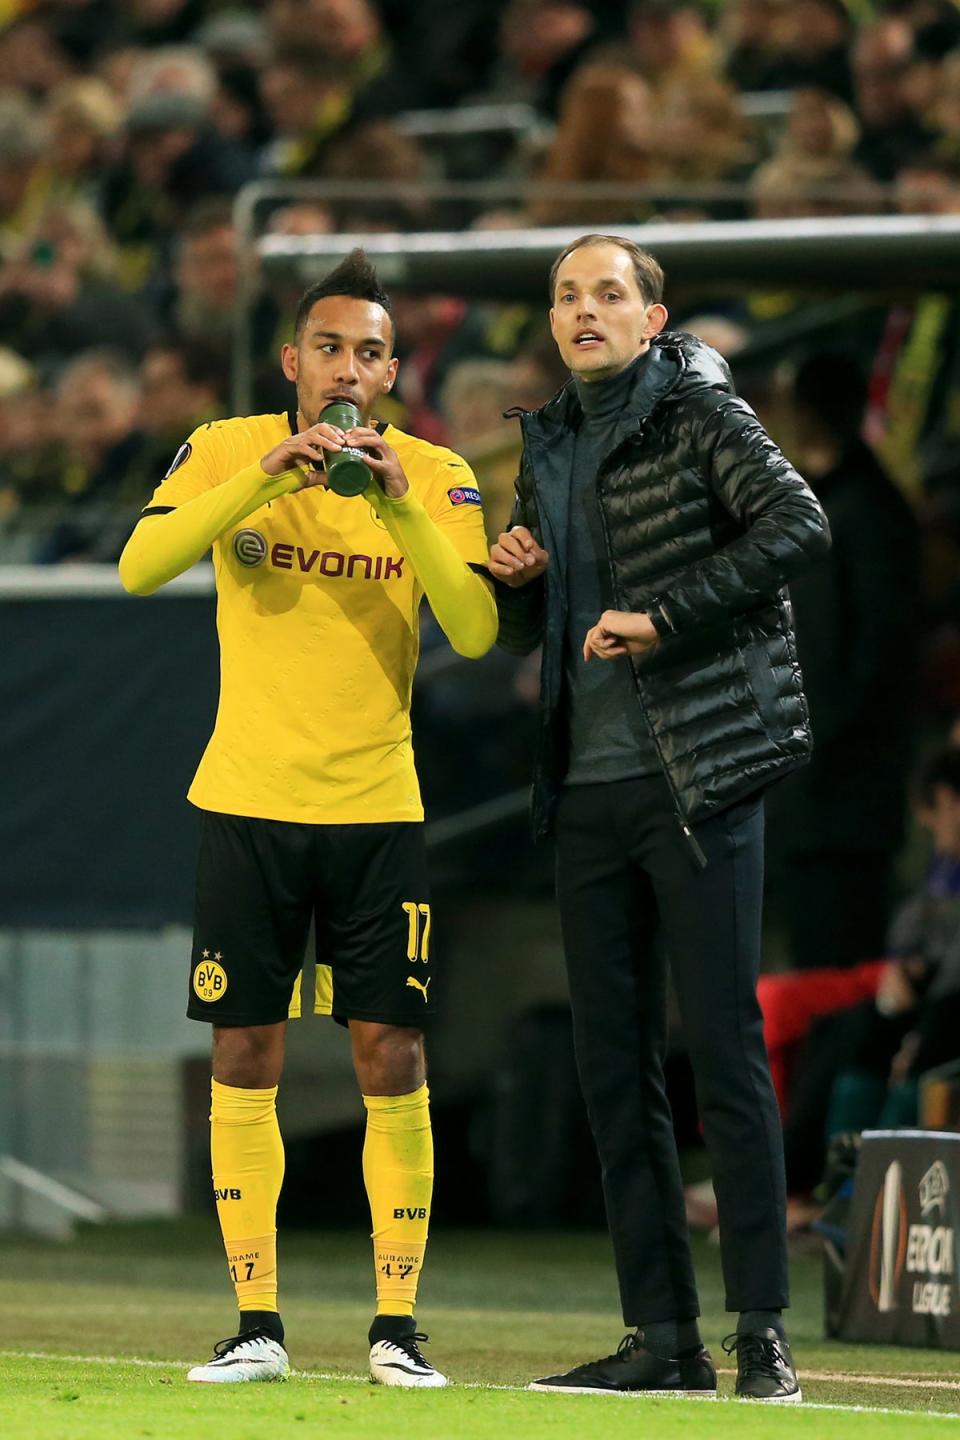 Barcelona are thought to be ready to negotiate over Pierre-Emerick Aubameyang, left, who could reunite with Thomas Tuchel, right (Adam Davy/PA) (PA Archive)